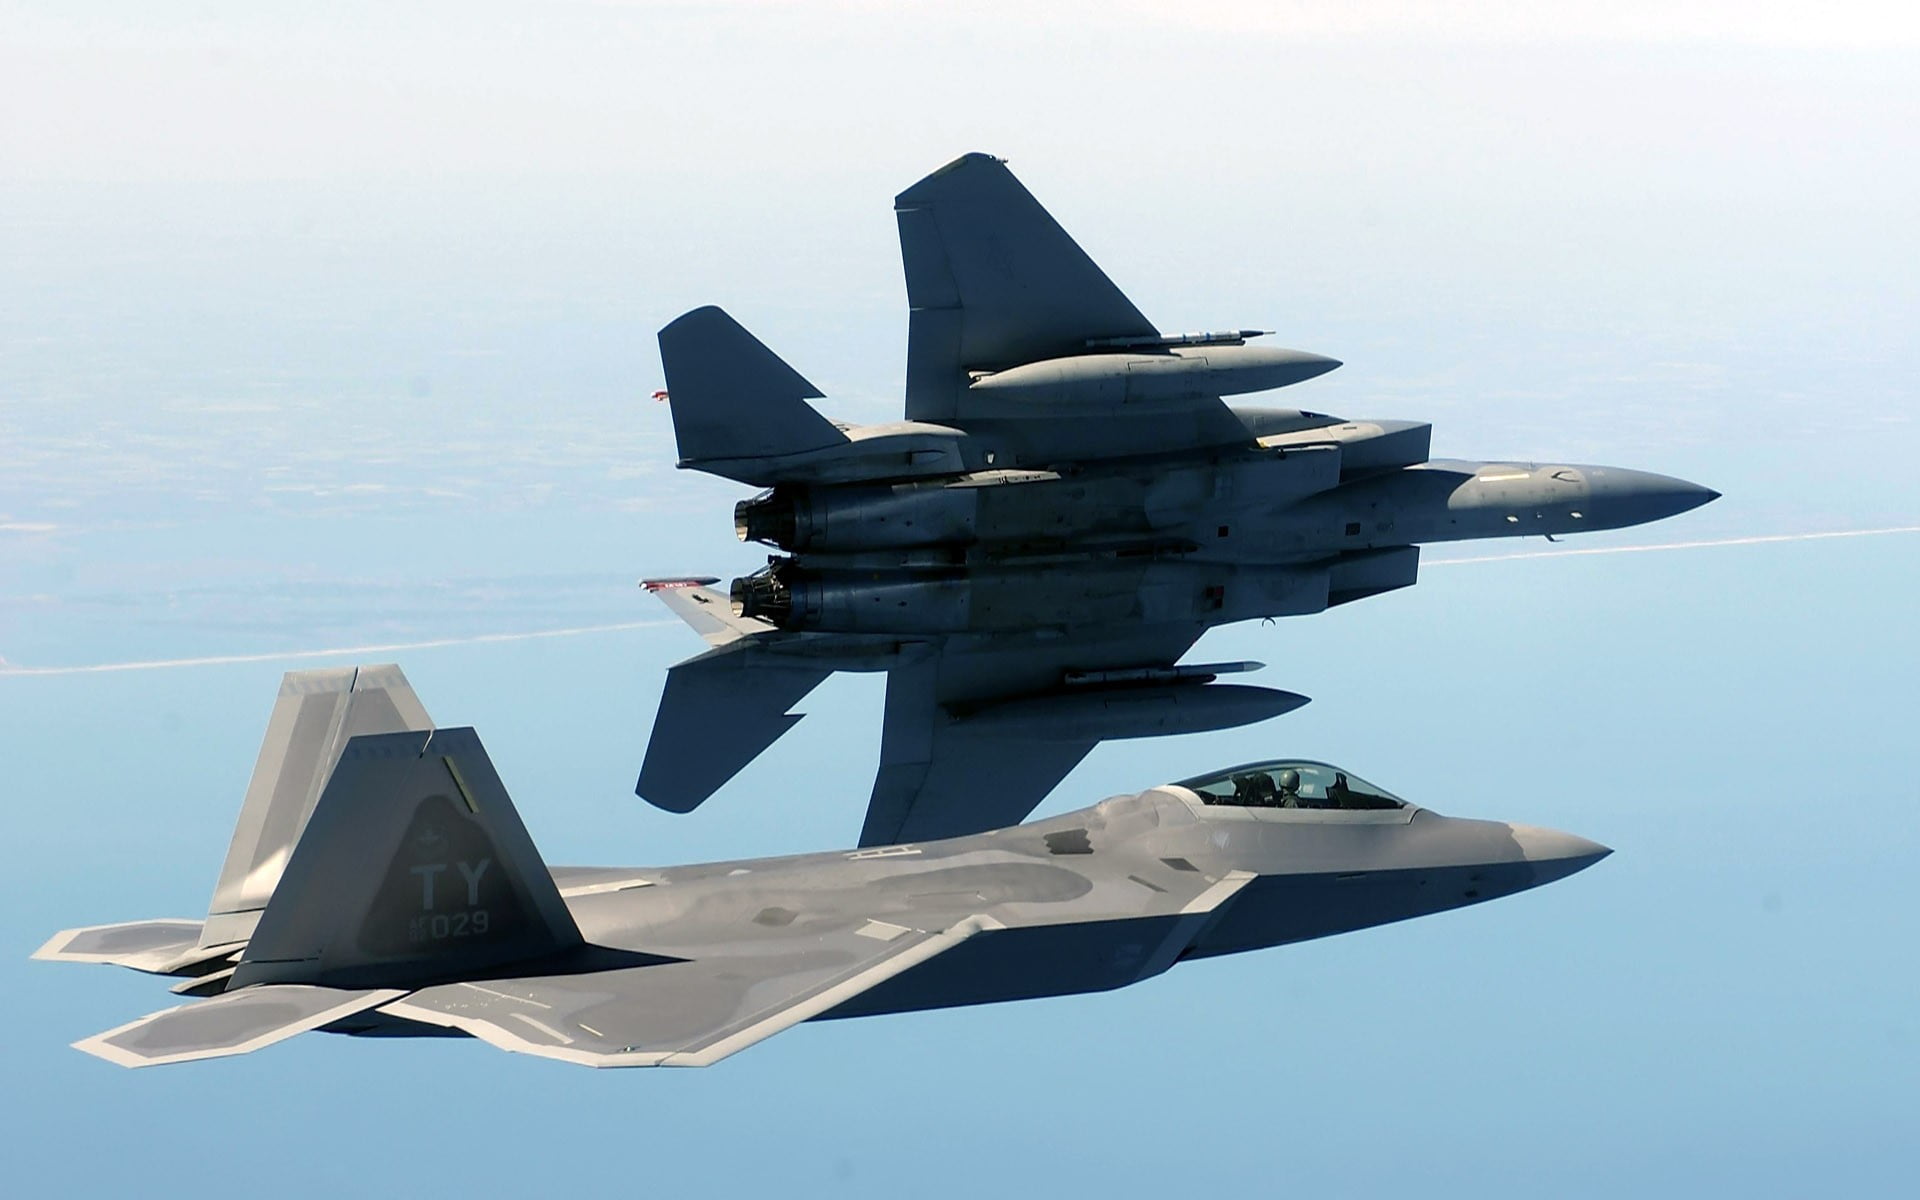 two gray fighter planes, F-22 Raptor, F-15 Eagle, military aircraft